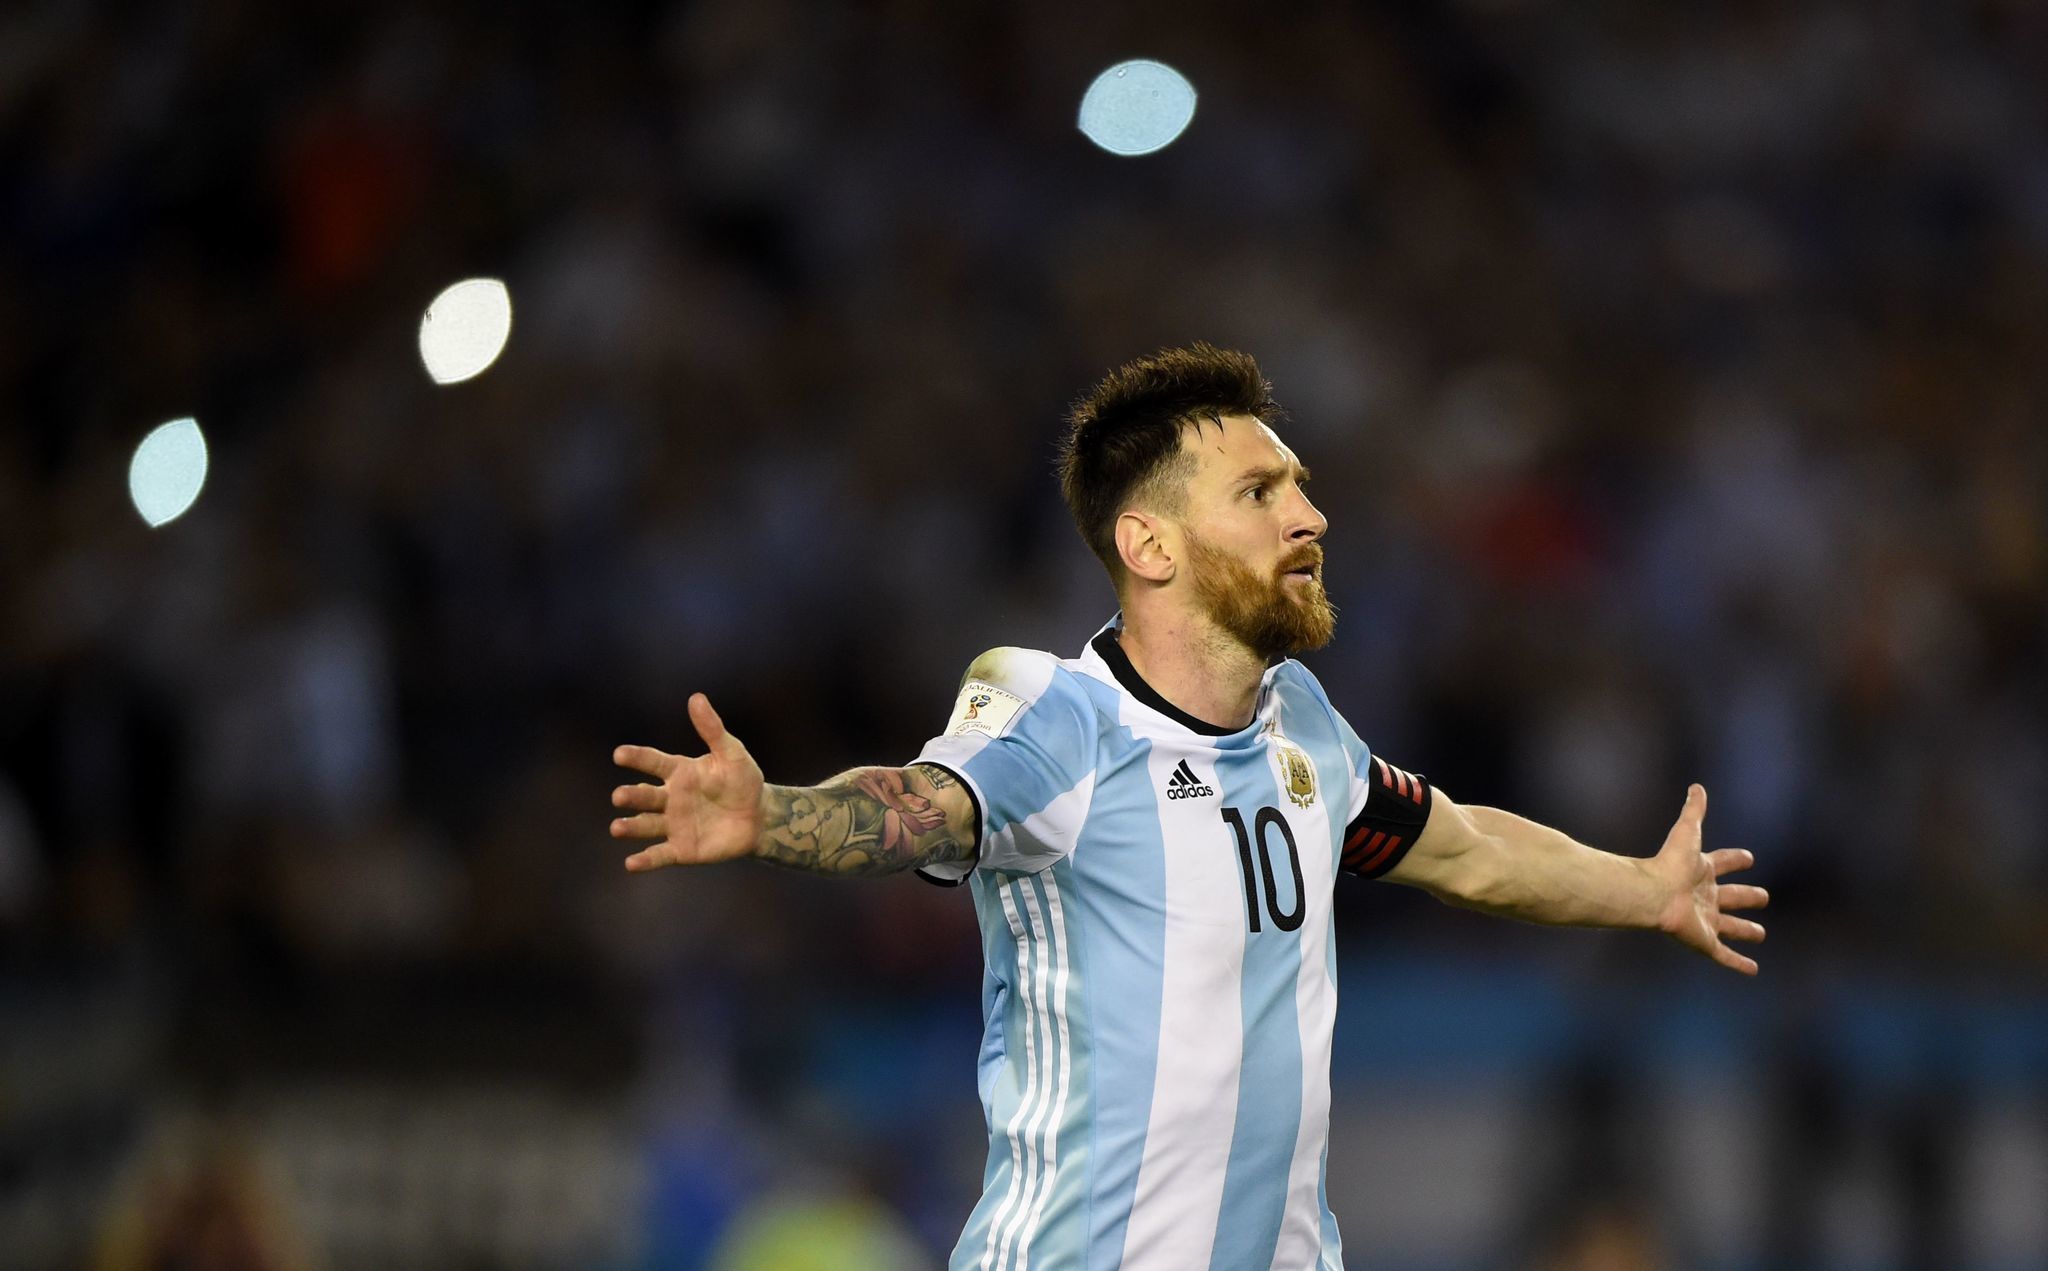 lionel messi celebration after scoring goal in fifa world cup